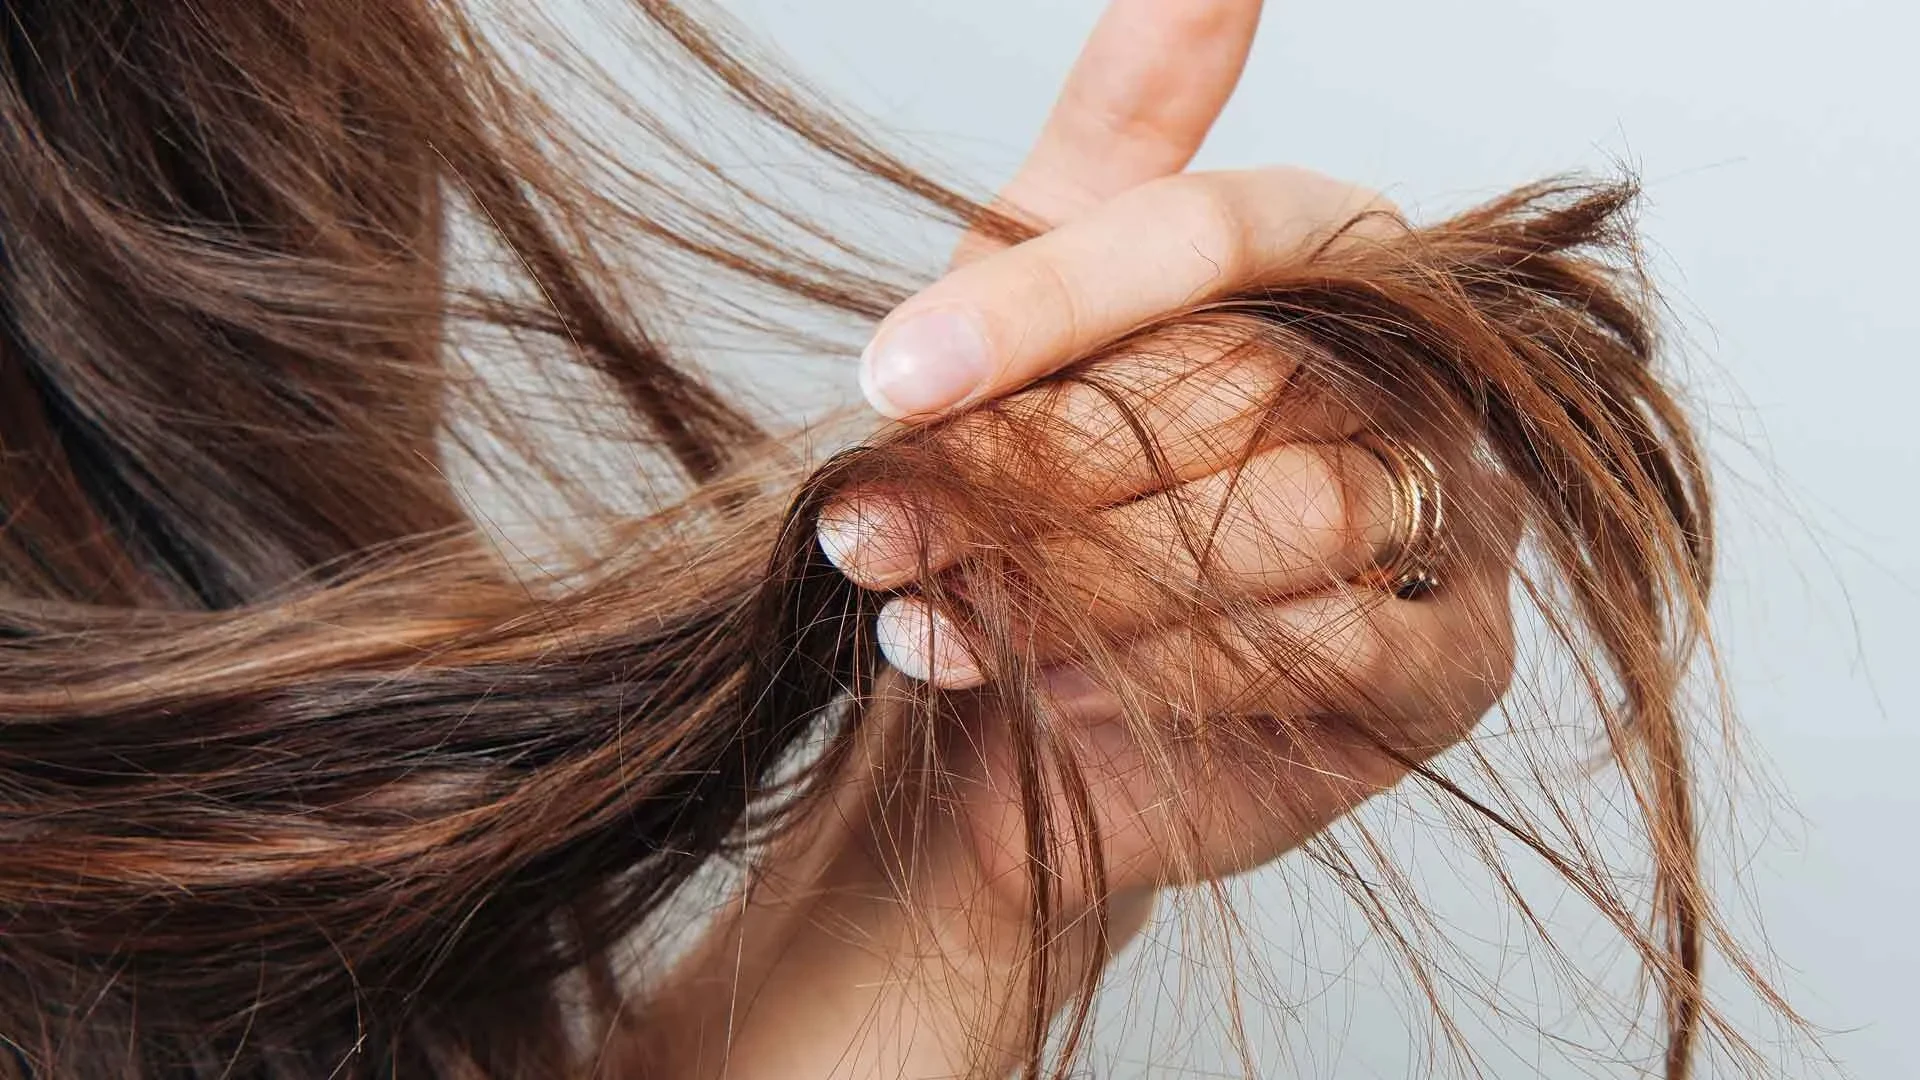 5 signs by which you can recognize healthy hair